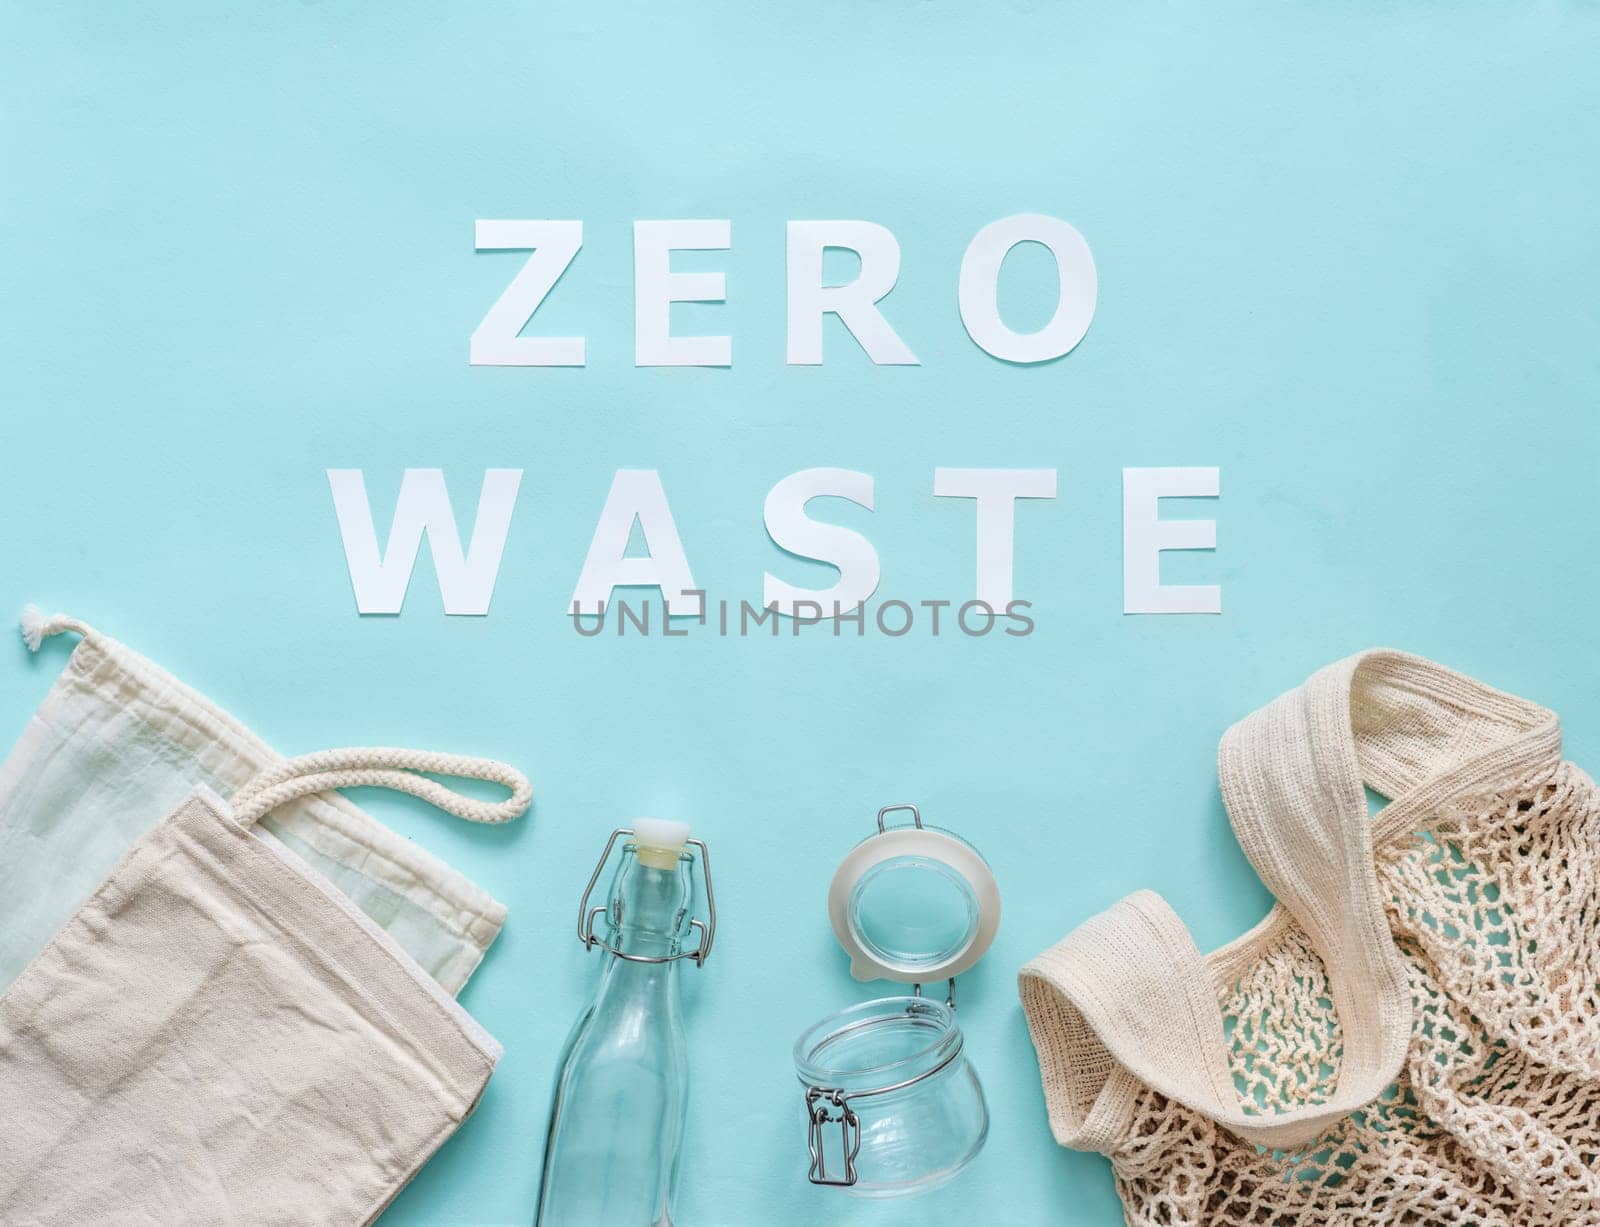 Zero waste concept. Textile eco bags, glass jar and bottle on blue background with Zero Waste white paper text. Eco friendly and reuse concept. Top view or flat lay